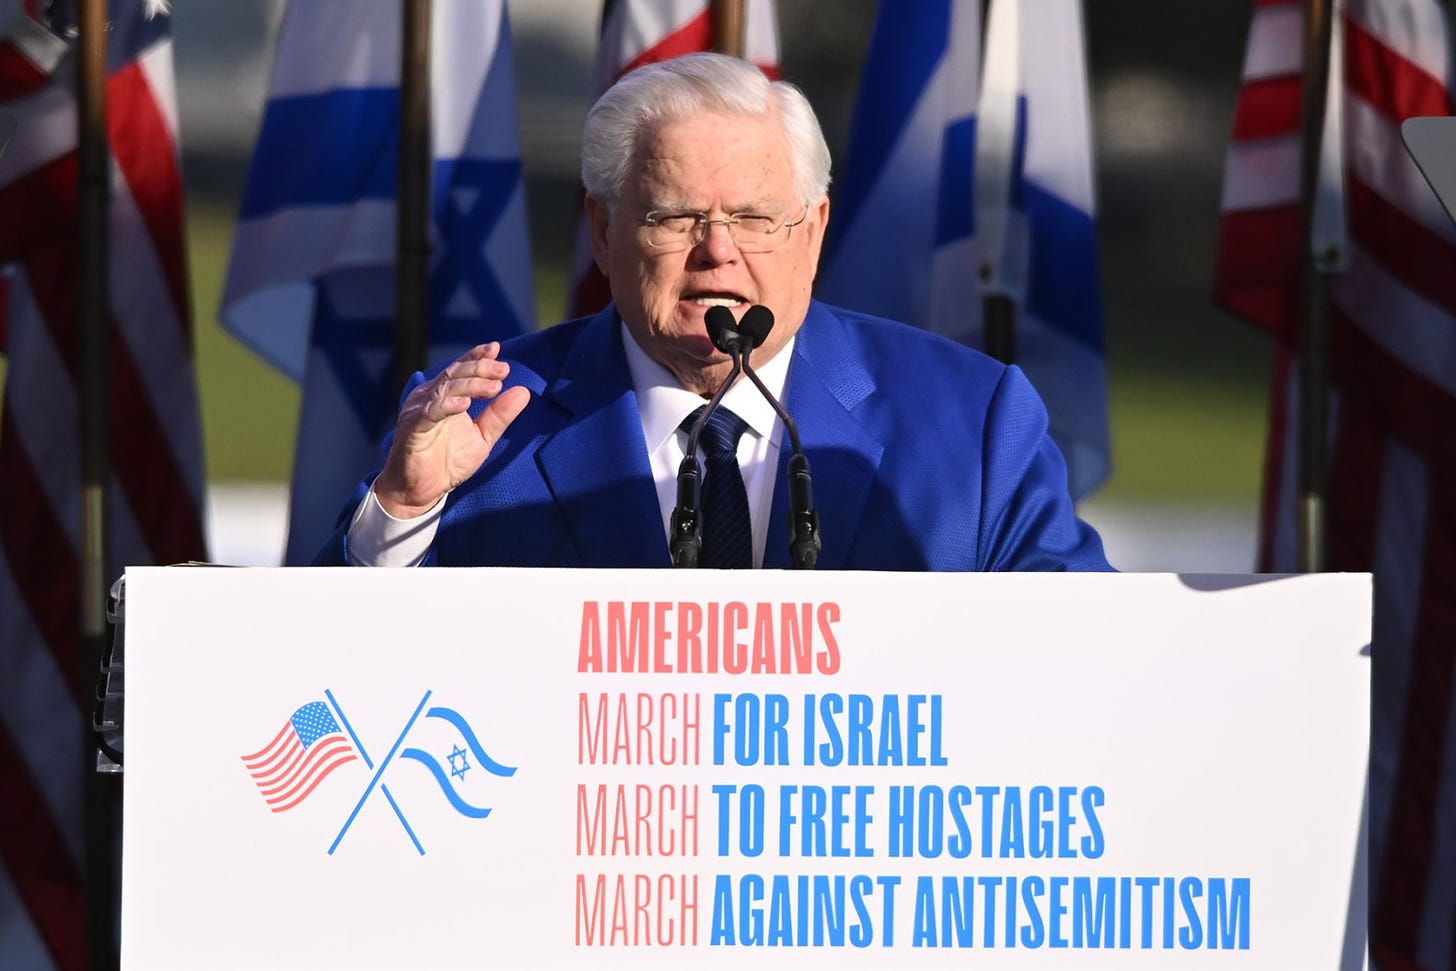 WASHINGTON, DC - NOVEMBER 14: Pastor John Hagee speaks during 'March For Israel' at the National Mall on November 14, 2023 in Washington, DC. The large pro-Israel gathering comes as the Israel-Hamas war enters its sixth week following the October 7 terrorist attacks by Hamas. (Photo by Noam Galai/Getty Images)